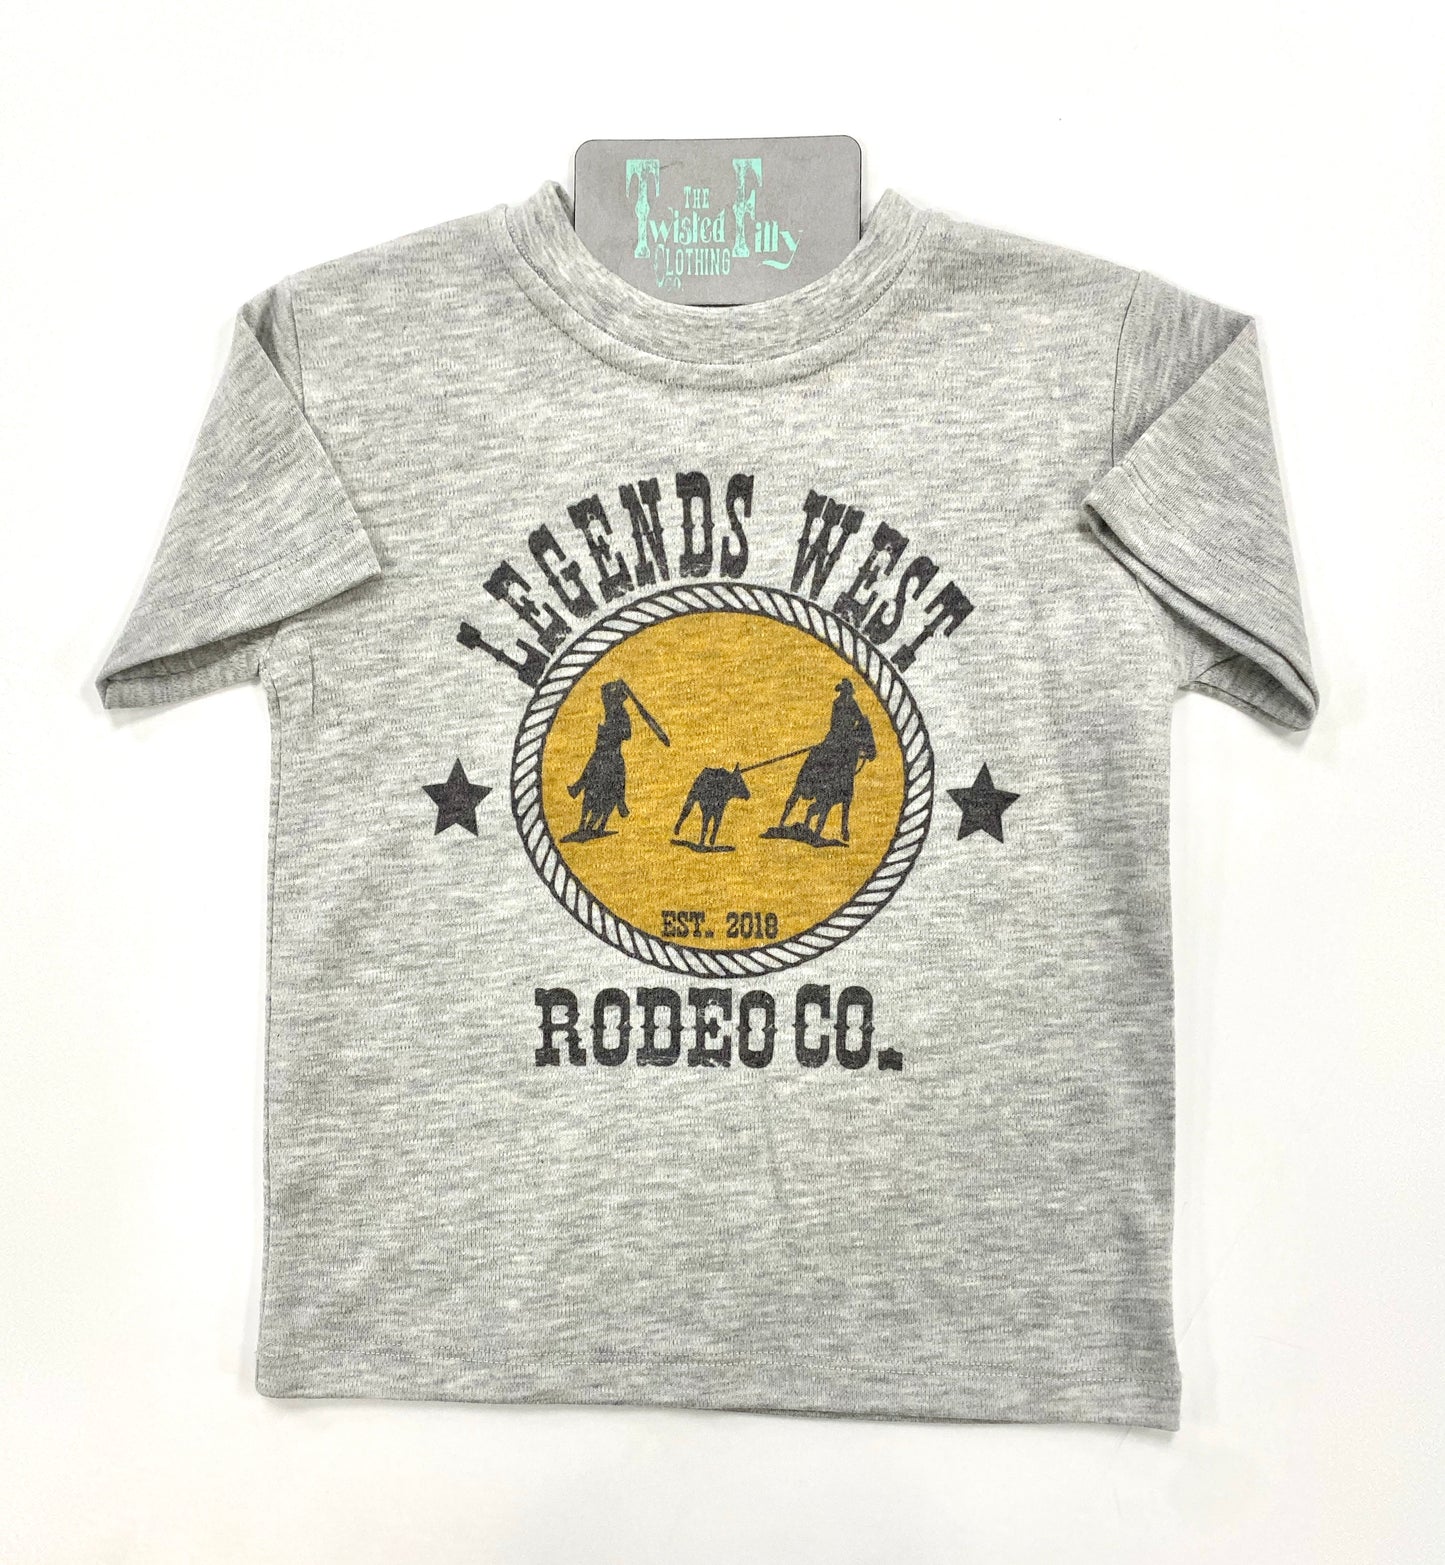 Legends West Rodeo Co. Team Roper - S/S Toddler Tee - Gray